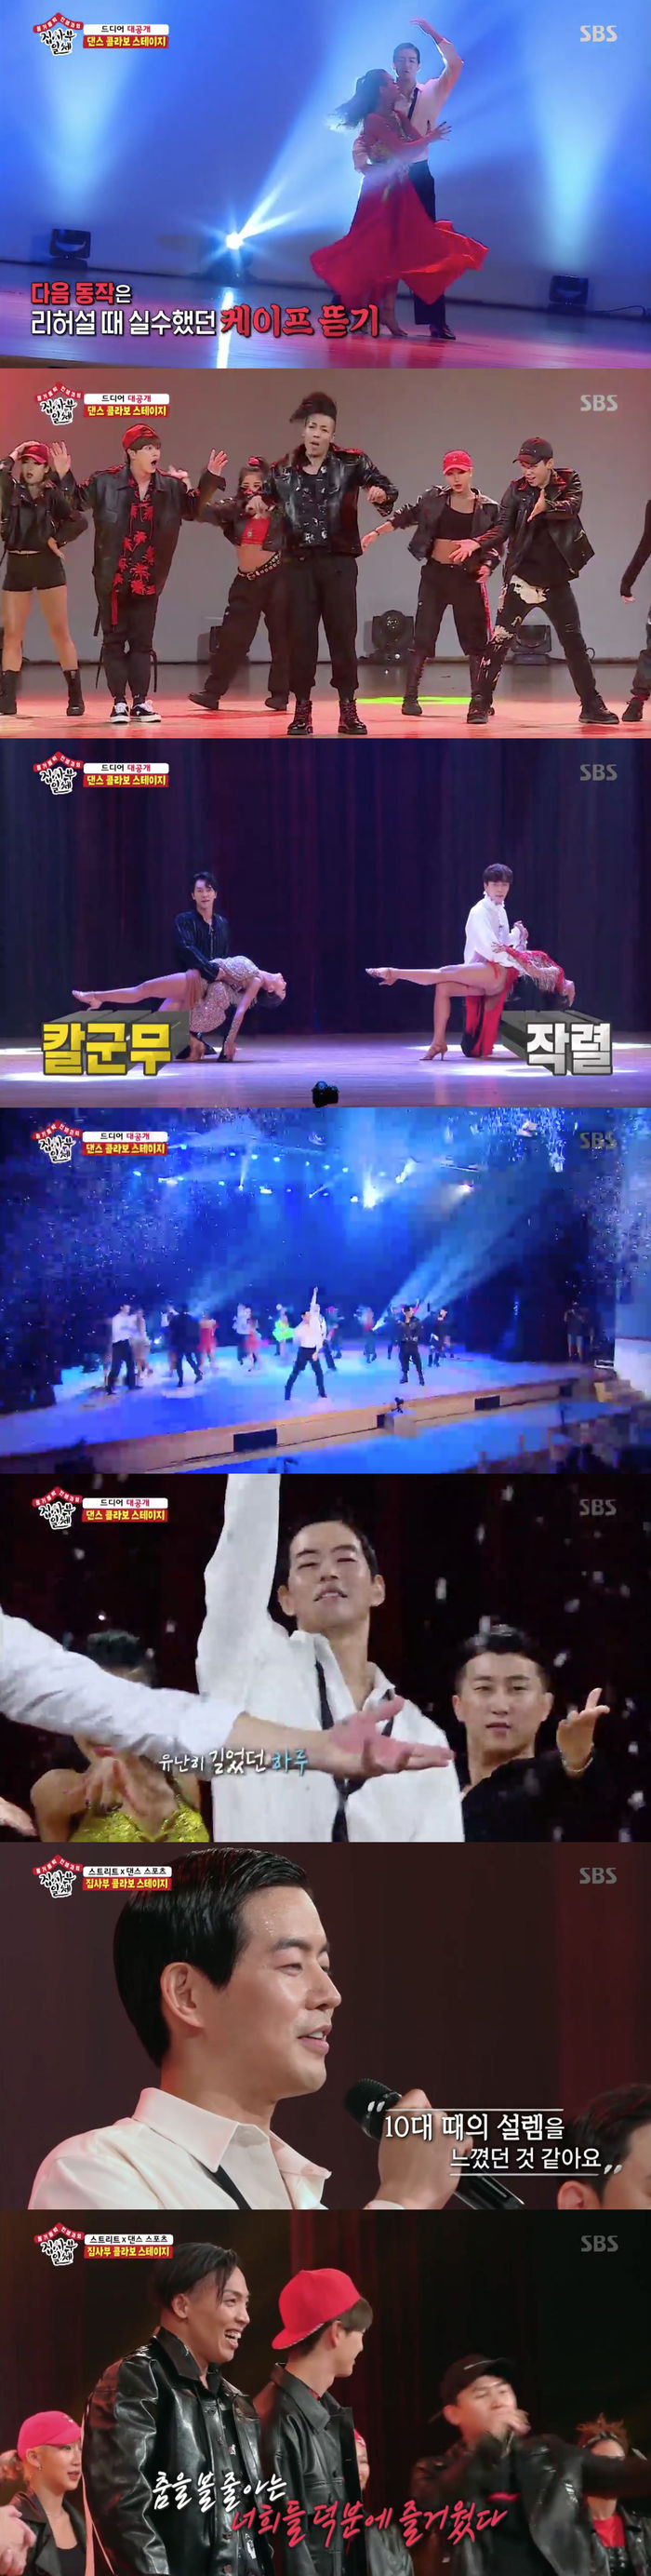 Rising Hyungjae and Shin Sung-rok presented the fantastic dance Collabo stage.On SBS All The Butlers broadcasted on the 15th, the rising figure and daily student Shin Sung-rok were shown to show the Collabo dance stage.On this day, the rising figure and Shin Sung-rok were exhausted by repeated practice.In particular, Shin Sung-rok said, It is harder than the drama <Bae Bond> action.Lee Seung-gi, who watched this, said, When I look at my face, I have lost weight than morning. I am wearing a luxury tee now, but it is a naning ball.Shin Sung-rok said, I am completely panicked now. I do not know who it is for. Do you have time to practice tomorrow?The production team suggested, So we will provide special effects to help, he said.And as a result of the quiz showdown, the street dance team won and got the special effect chance of air shot.At this time, the masters revealed that there was a major announcement: Master Park Ji-woo said: There is a little lack of impact now, so we added an ending solo stage.I will add a solo stage for a special ending. And the main character who will take the solo will be released on stage.On the day of the performance. The final rehearsal before the stage. The rising figures and Shin Sung-rok made mistakes unlike the practice, raising the worries of the masters.In particular, the dance sports team was worried about the master because Lee Seung-gi and Shin Sung-rok, who played the car from the opening, did not match each others timing properly.After a while, the dance club members began to stand, and the rising figures and Shin Sung-rok showed their nervousness. Finally, the dance collabo stage was released.Lee Sang-yoon made up for the mistakes he made in rehearsals and immersed himself in the drama, glamorously decorating the opening with his passionate performance; masters and disciples also cheered on the perfect opening stage.The following is Master Jay Blacks stage, and the dance club members were enthusiastic. Jay Black was able to show his fan service.The street dance stage started with Jay Blacks lead. The stage was performed only by Powerful with the addition of Yang Sung Jae and Yang Se-hyeong.In particular, they perfectly matched the timing of the appearance that was not met in rehearsals.The following stage was the Cha Cha Cha Cha of Lee Seung-gi and Shin Sung-rok. It was an important stage to breathe and beat with the partner.They were all nervous before the start of the stage, but the stage began and the tension behind the stage disappeared completely.Lee Seung-gi and Shin Sung-rok were completely immersed in the stage without enviing a professional dancer; they also impressed the staff who had trouble in practice.After that, Jay Black and Park Ji-woo, the masters of the two masters, were held. The dance-end kings were enthusiastic.And all the last dancers were together, the endings.And the last special ending solo. The main character of the solo was Lee Sang-yoon.Lee Sang-yoon took off the image of the body of the past and received a big applause as a dancer.After the stage, the masters and dancers cheered each other up and celebrated the perfect stage. Lee Sang-yoon said, It was a lot of work for me, as you know.But last night I felt strangely as a teenager, so it was so good. Shin Sung-rok also said, I am not a member, but I have been involved, and it was an unforgettable experience. Thank you.And Yang Se-hyeong said, I did not need anything else and I was delighted because of you who can dance.Finally, Master Park Ji-woo said, Please remember that our dance power was this much, and thank the dancers who were with me.